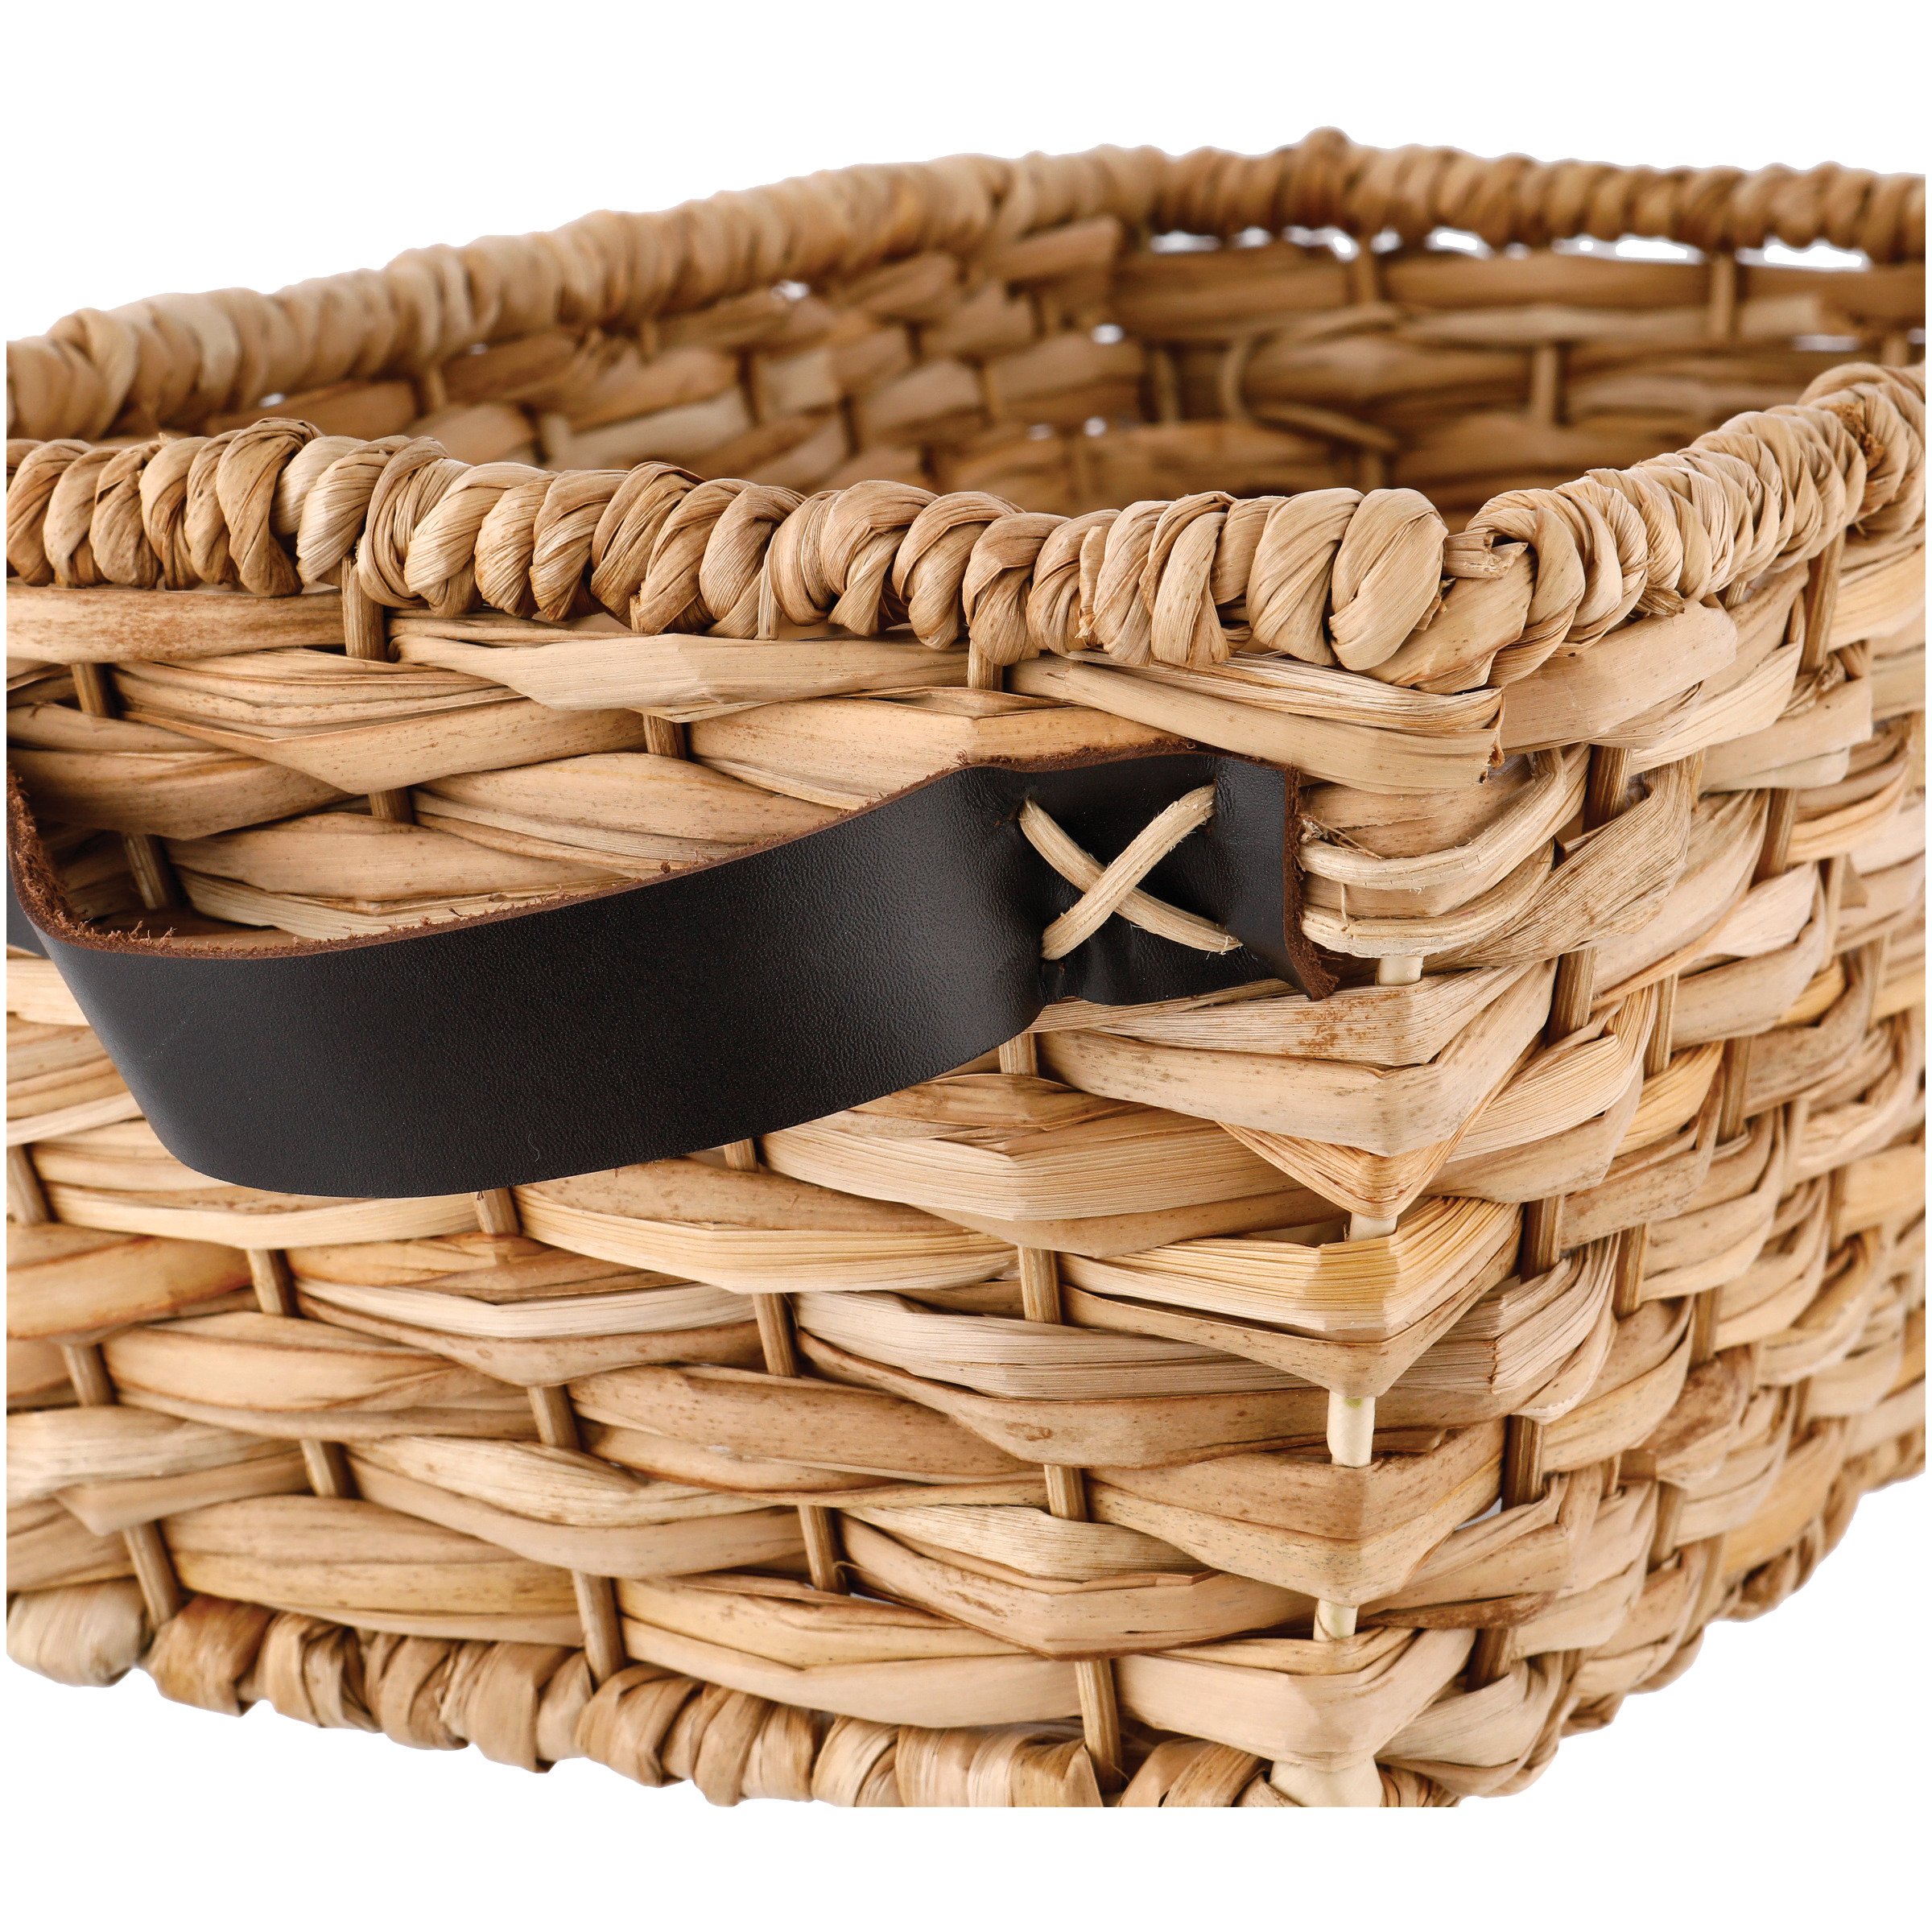 Haven + Key Small Rectangular Storage Basket with Leather Handles - Brown